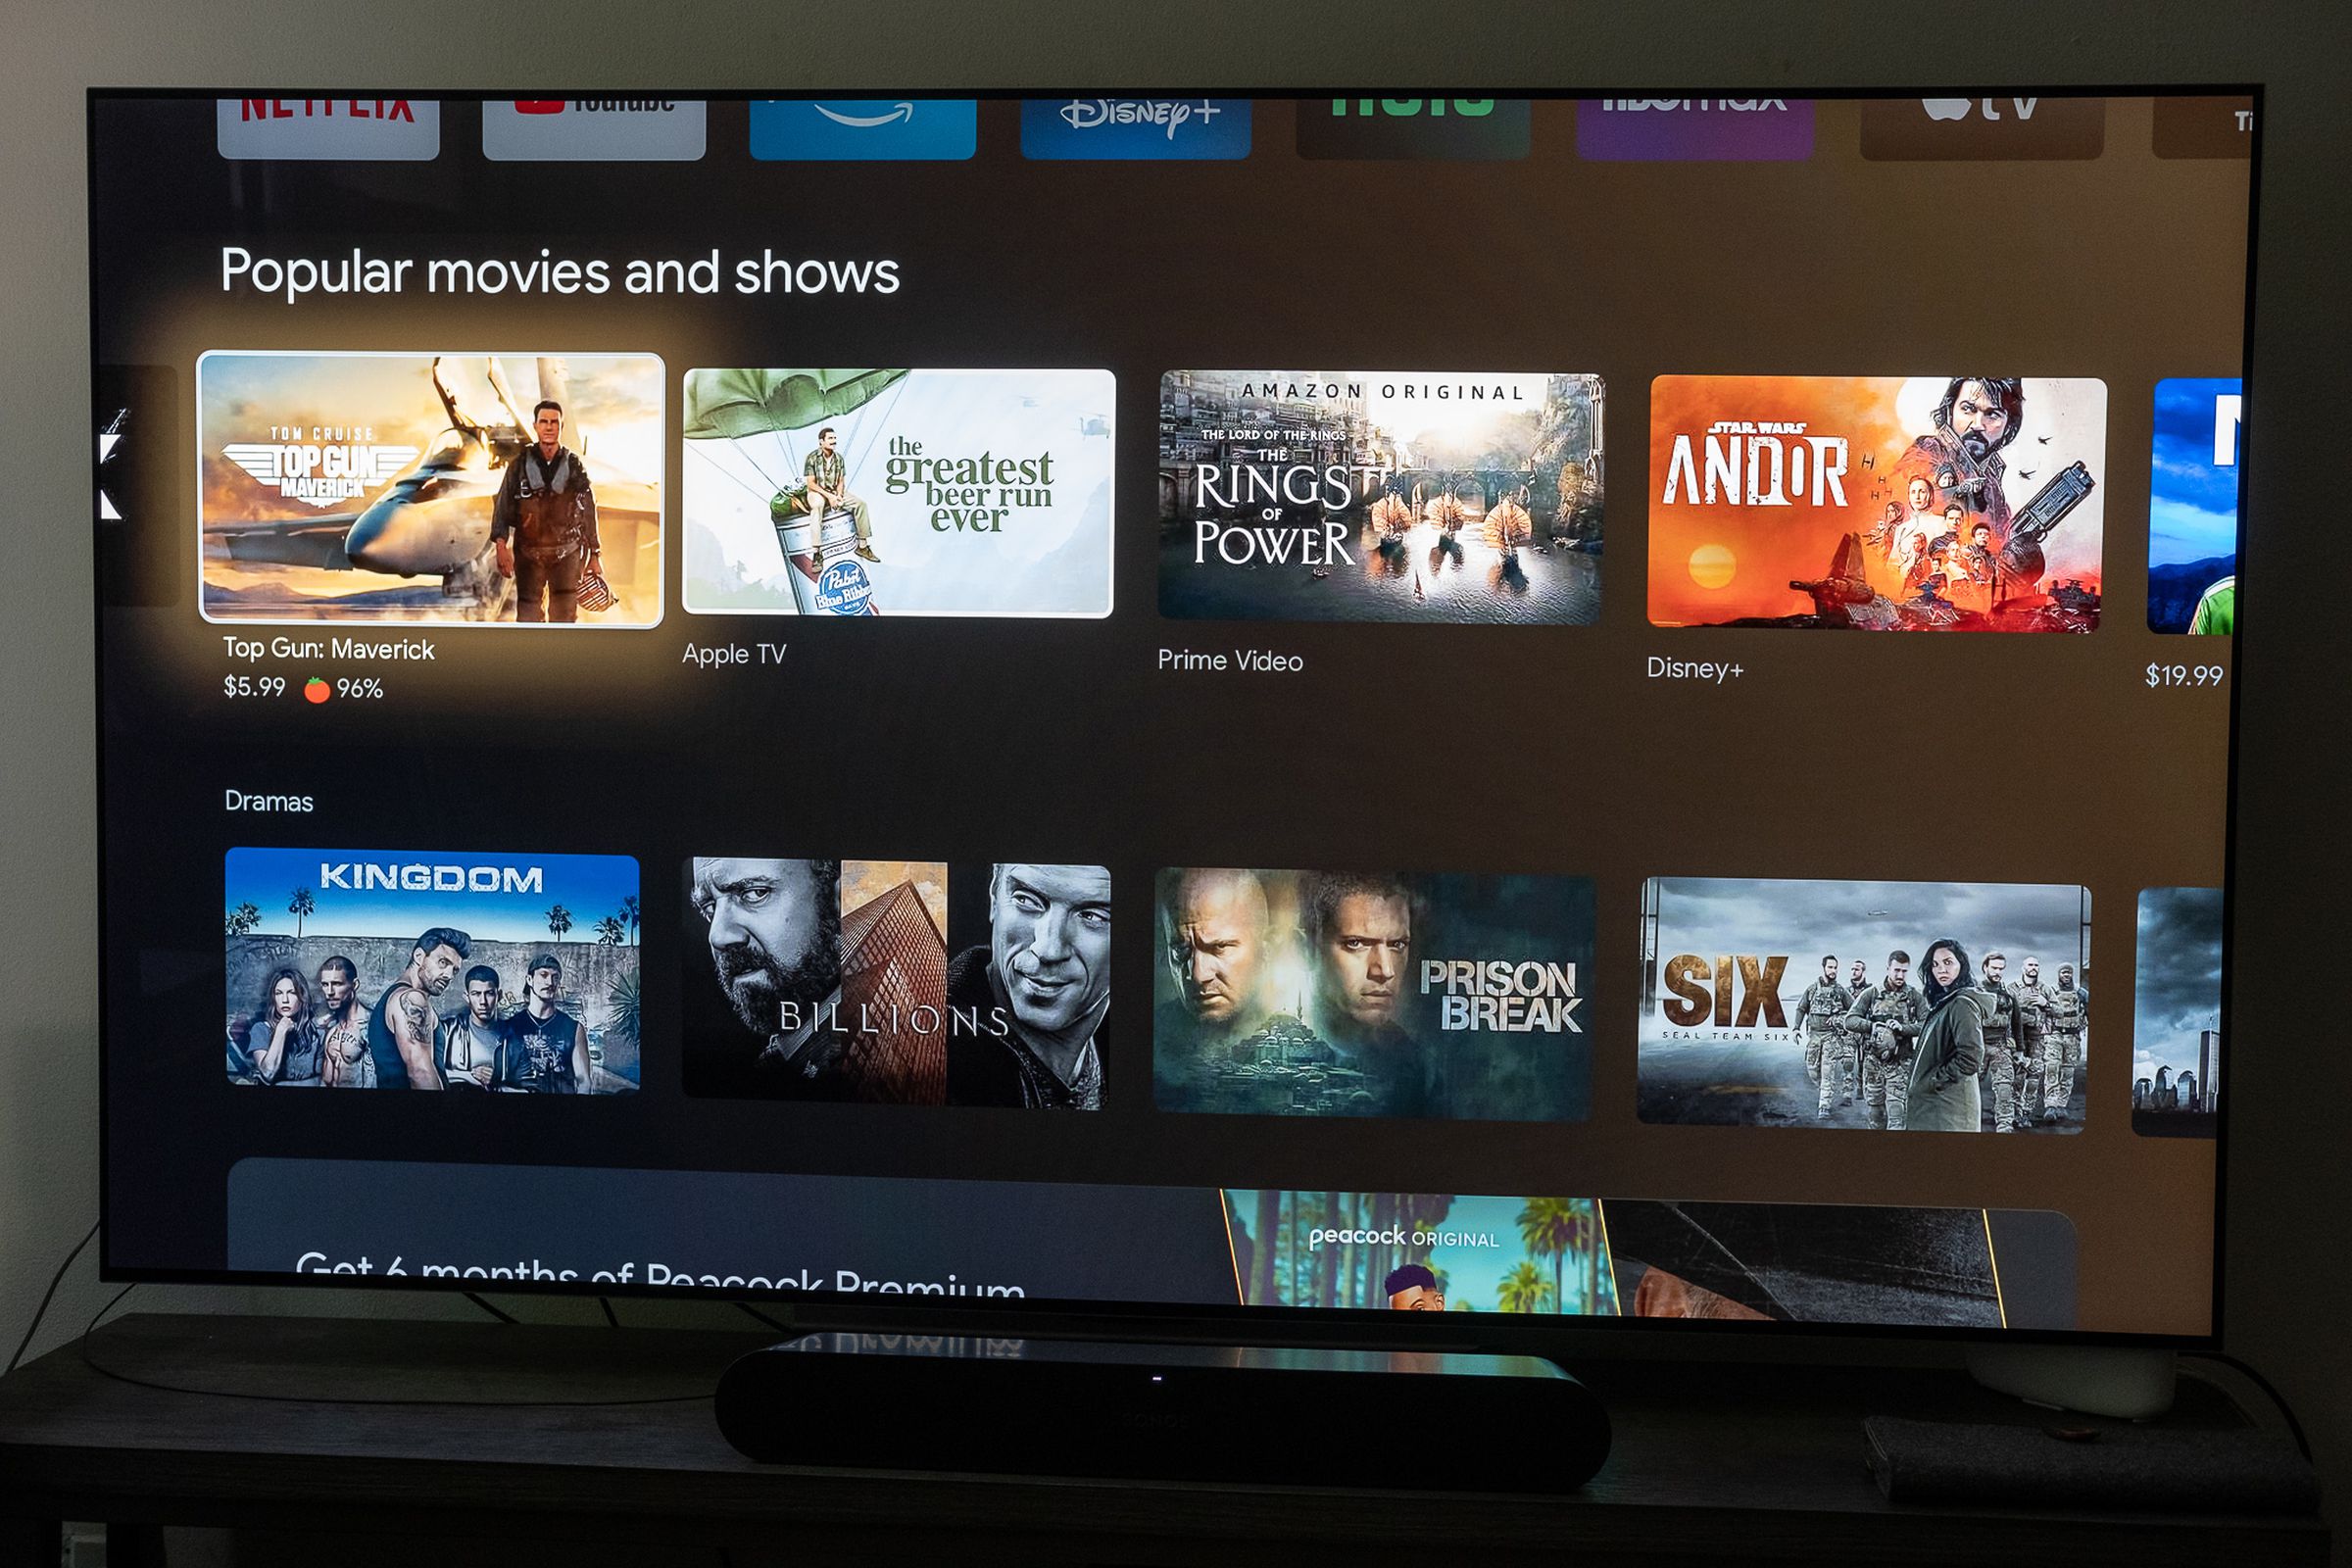 An image of the Google TV interface featuring several different movies and TV shows.